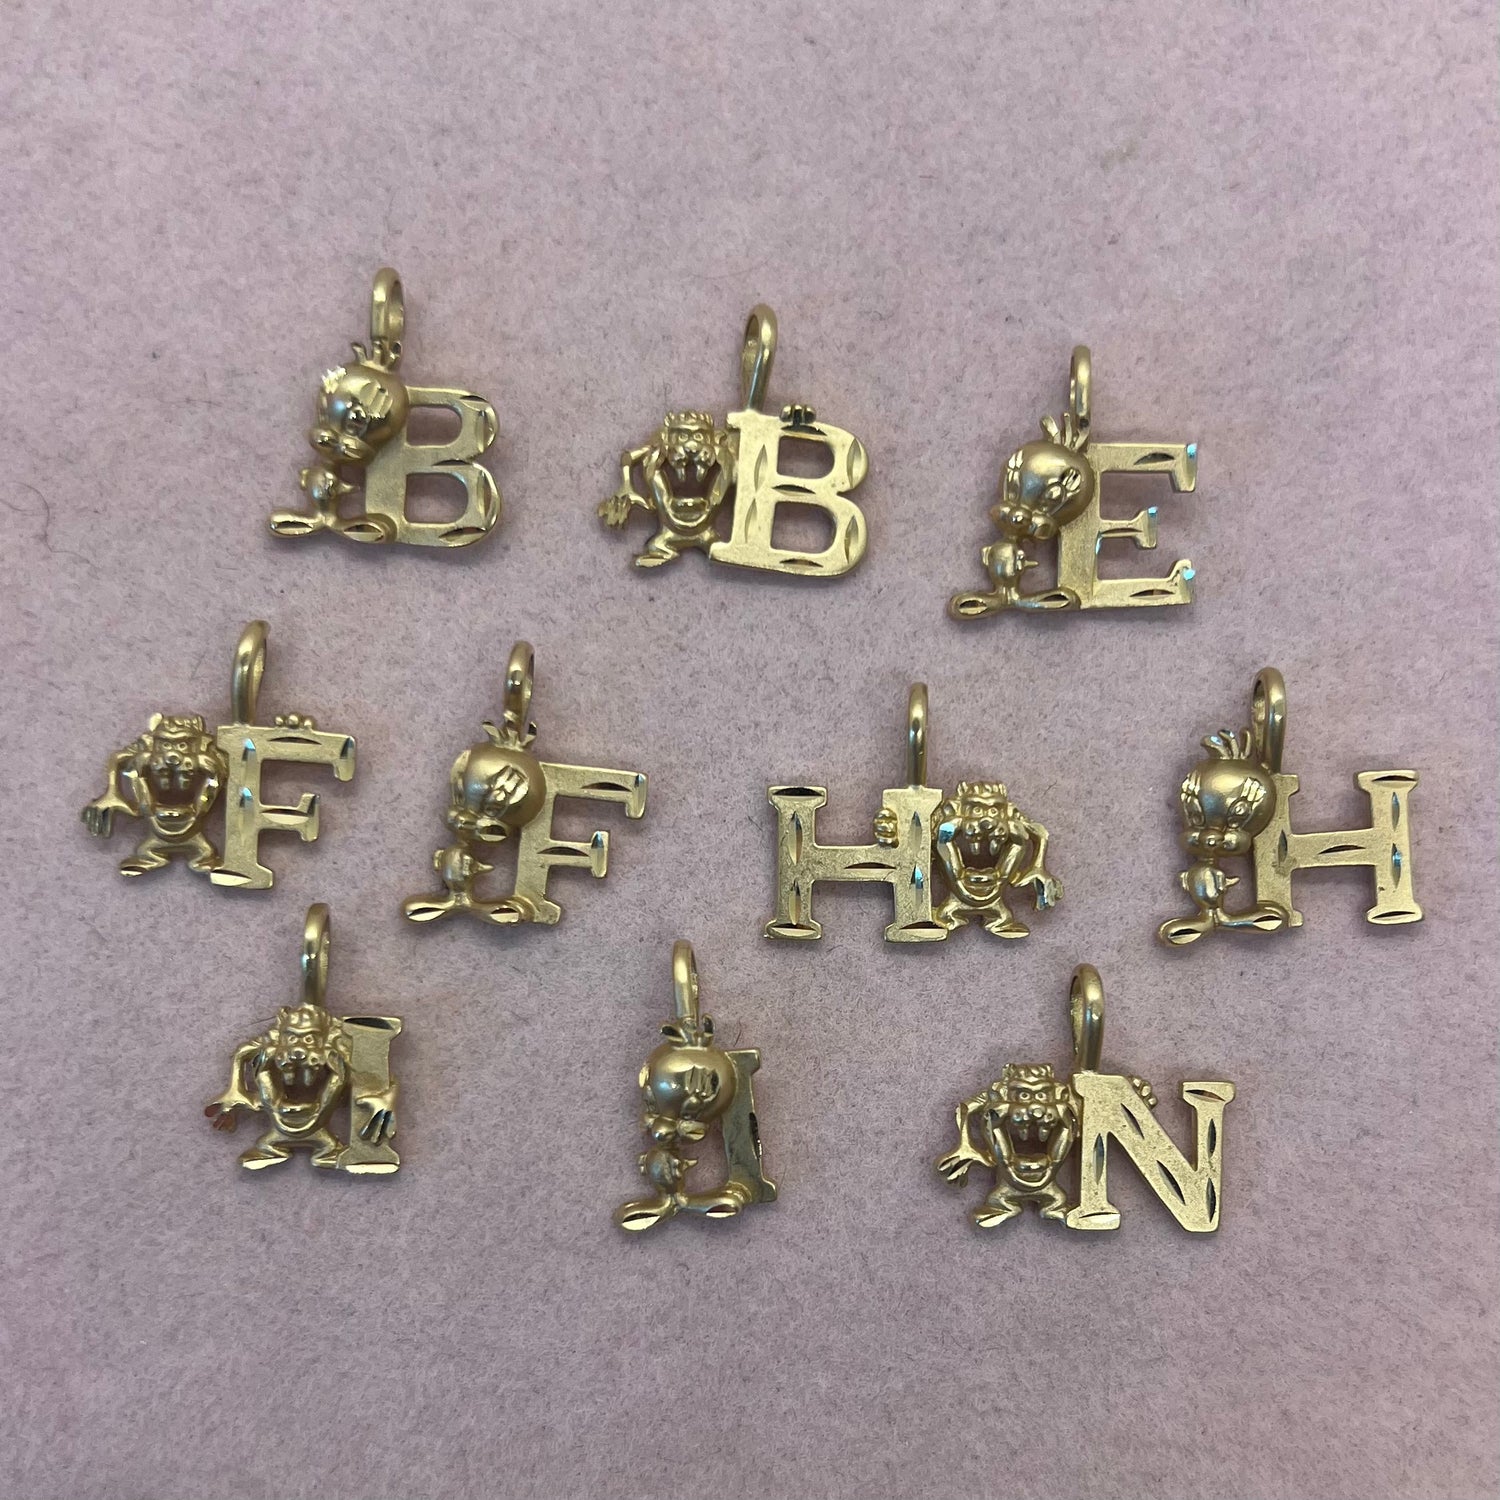 Tweety and Taz Initial Charms by Michael Anthony (1995) H: Taz